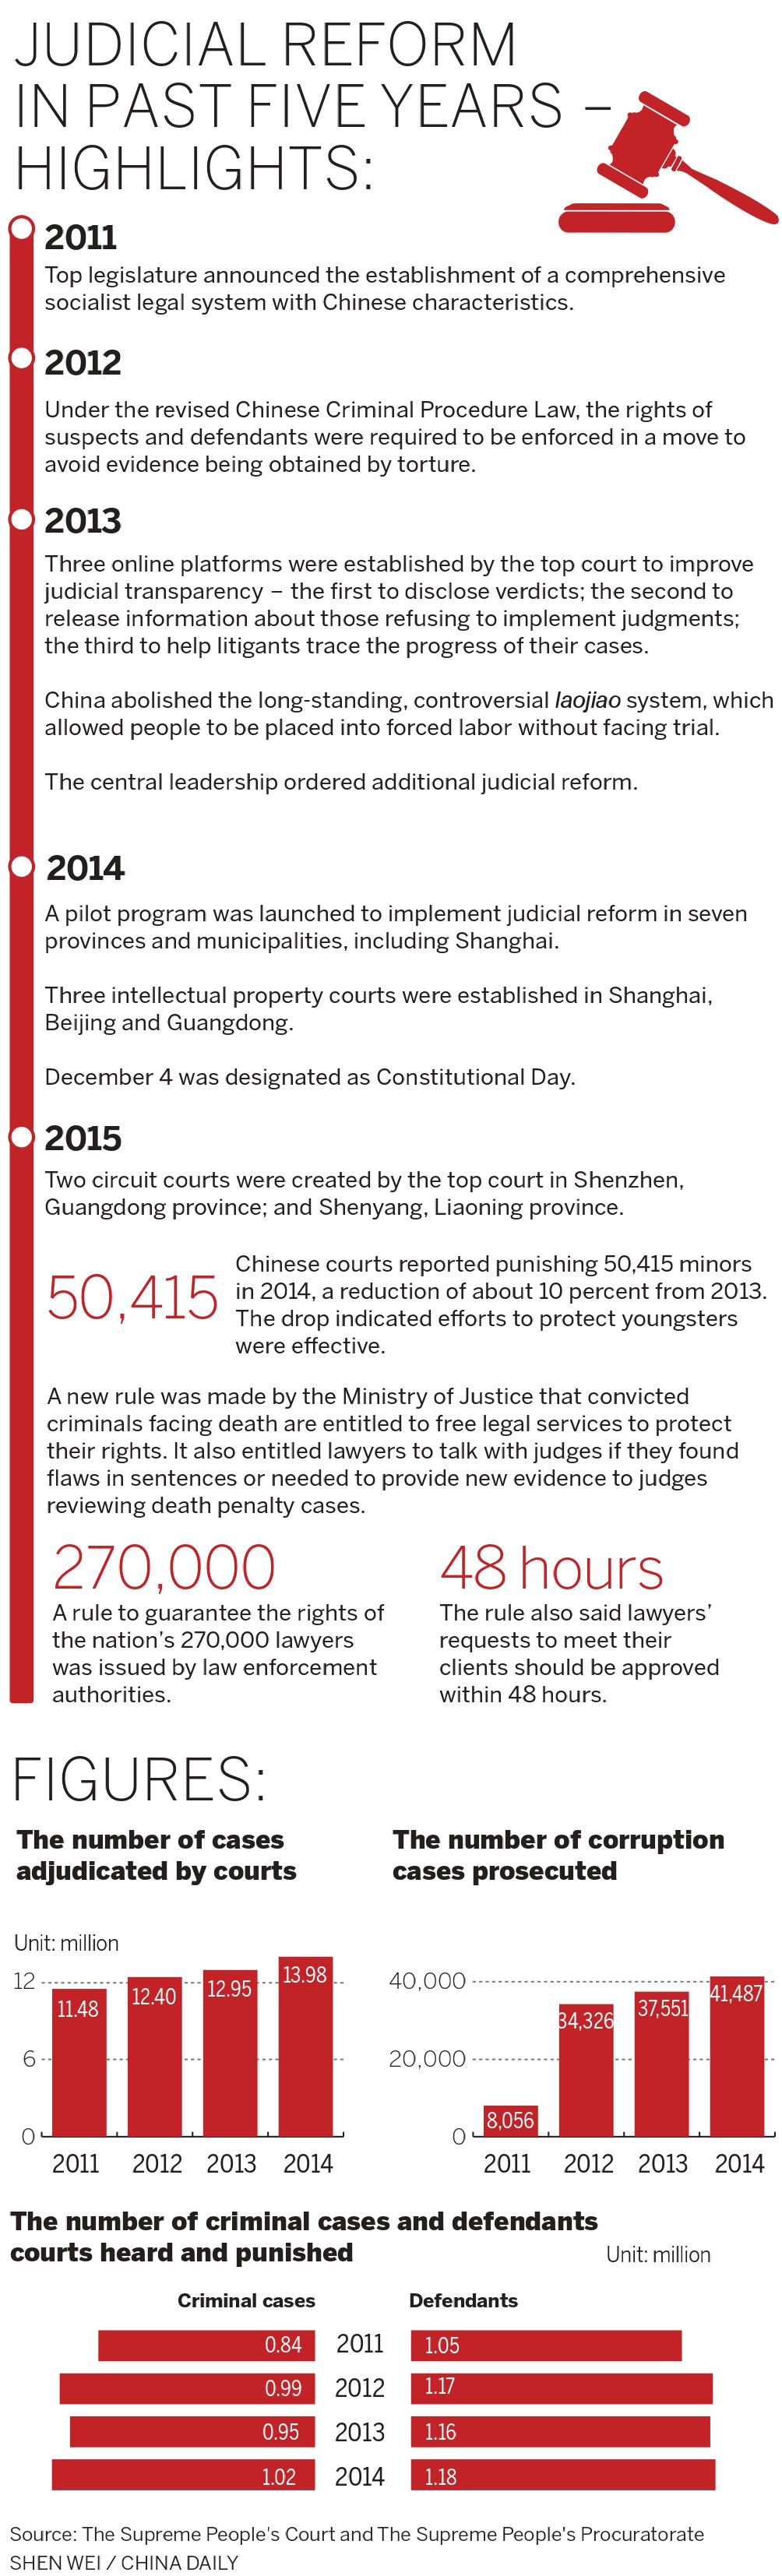 Judicial reform in past five years